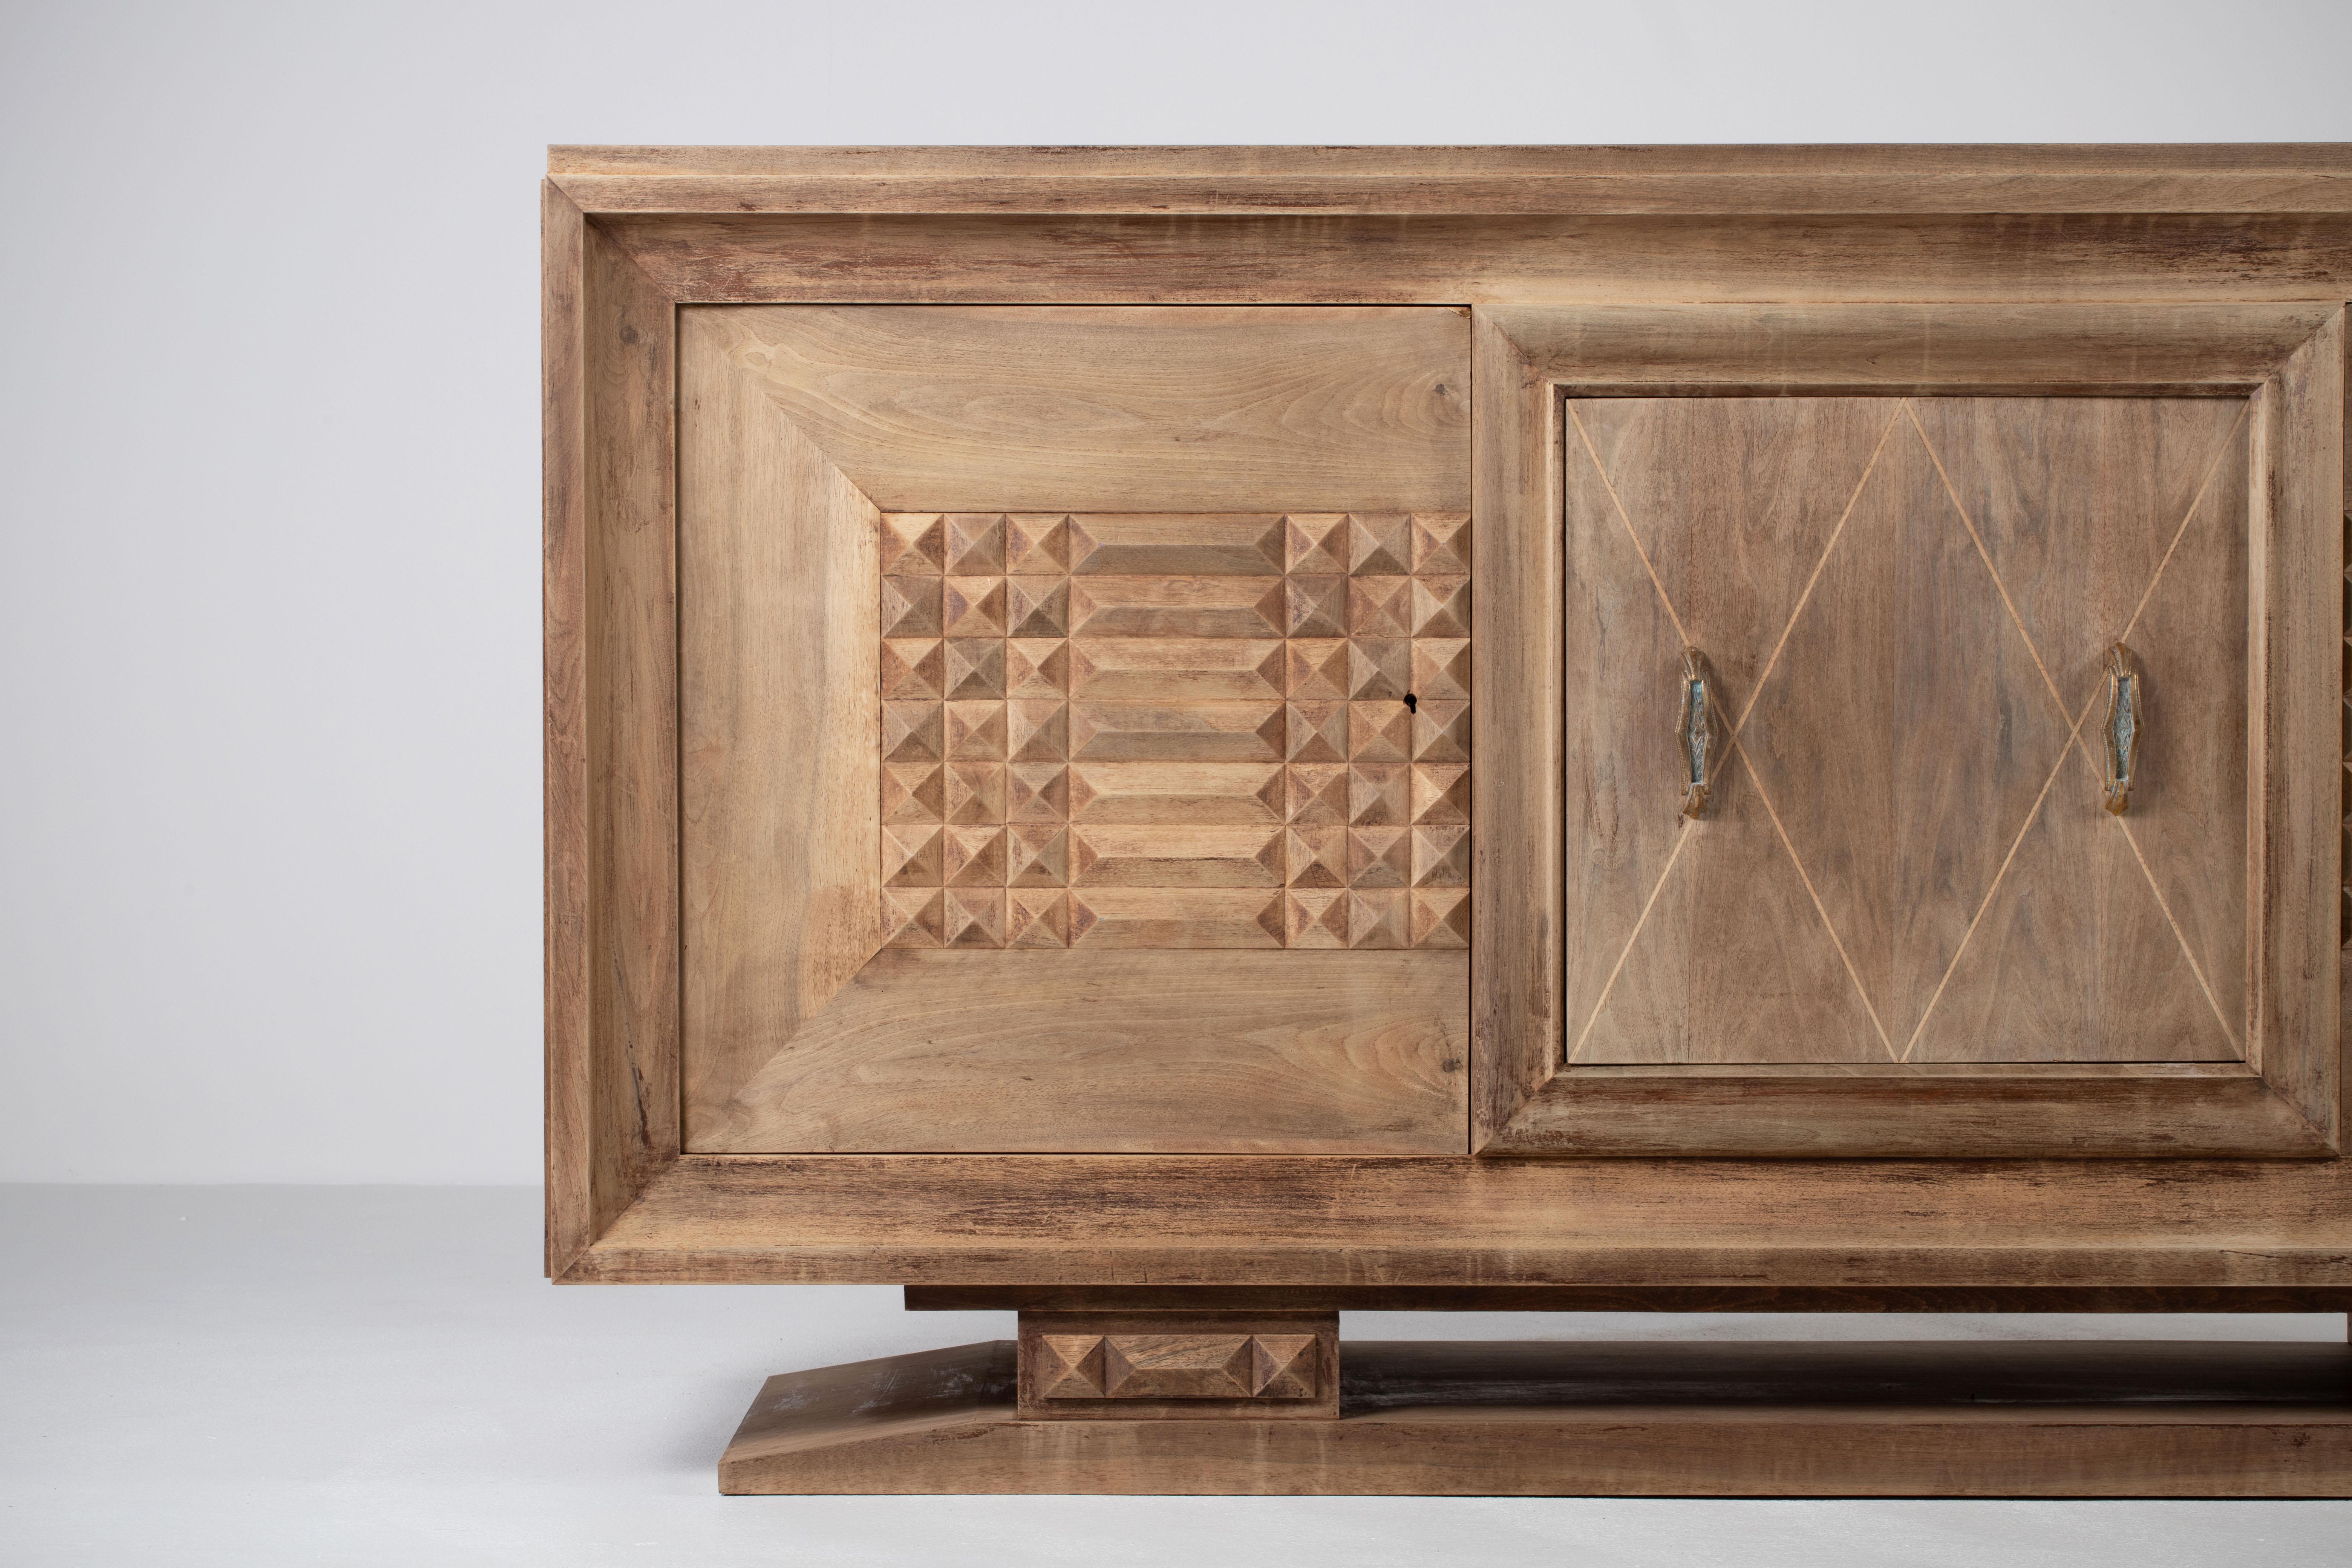 Bleached Art Deco Solid Oak Sideboard with Geometric Details, France, 1940s For Sale 1